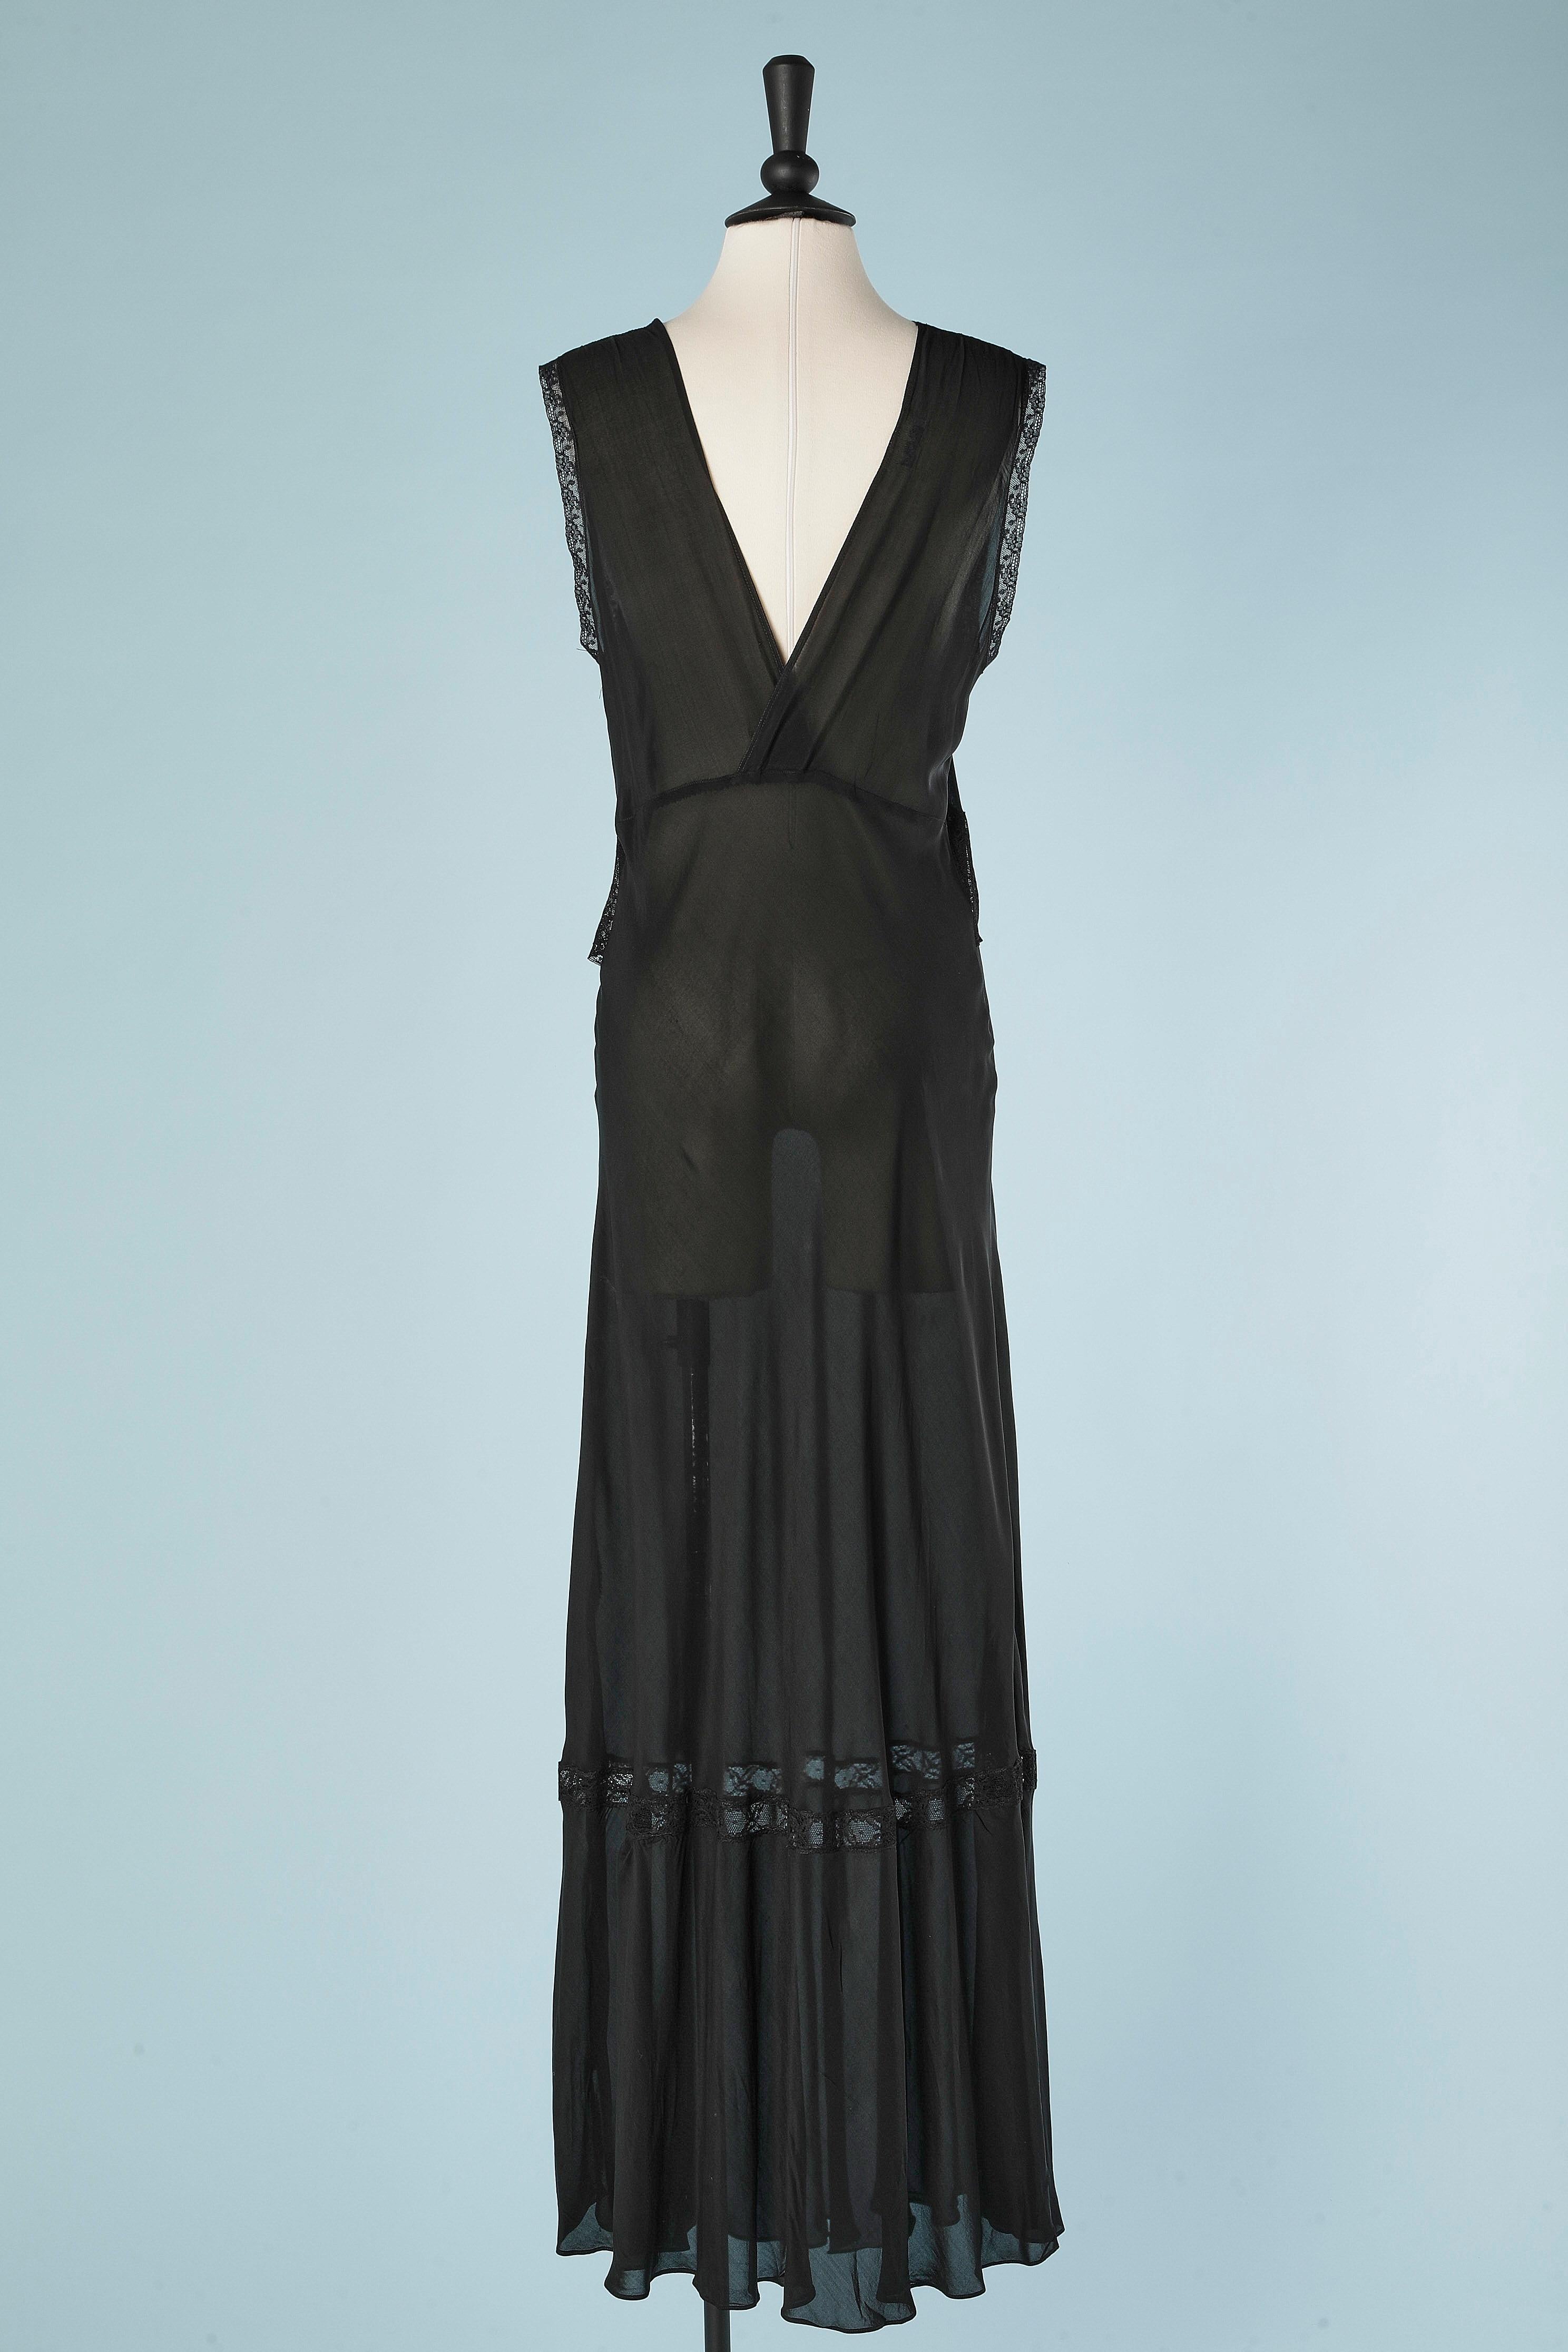 Black night gown with lace insert and satin flower in the middle front Charmode  For Sale 2